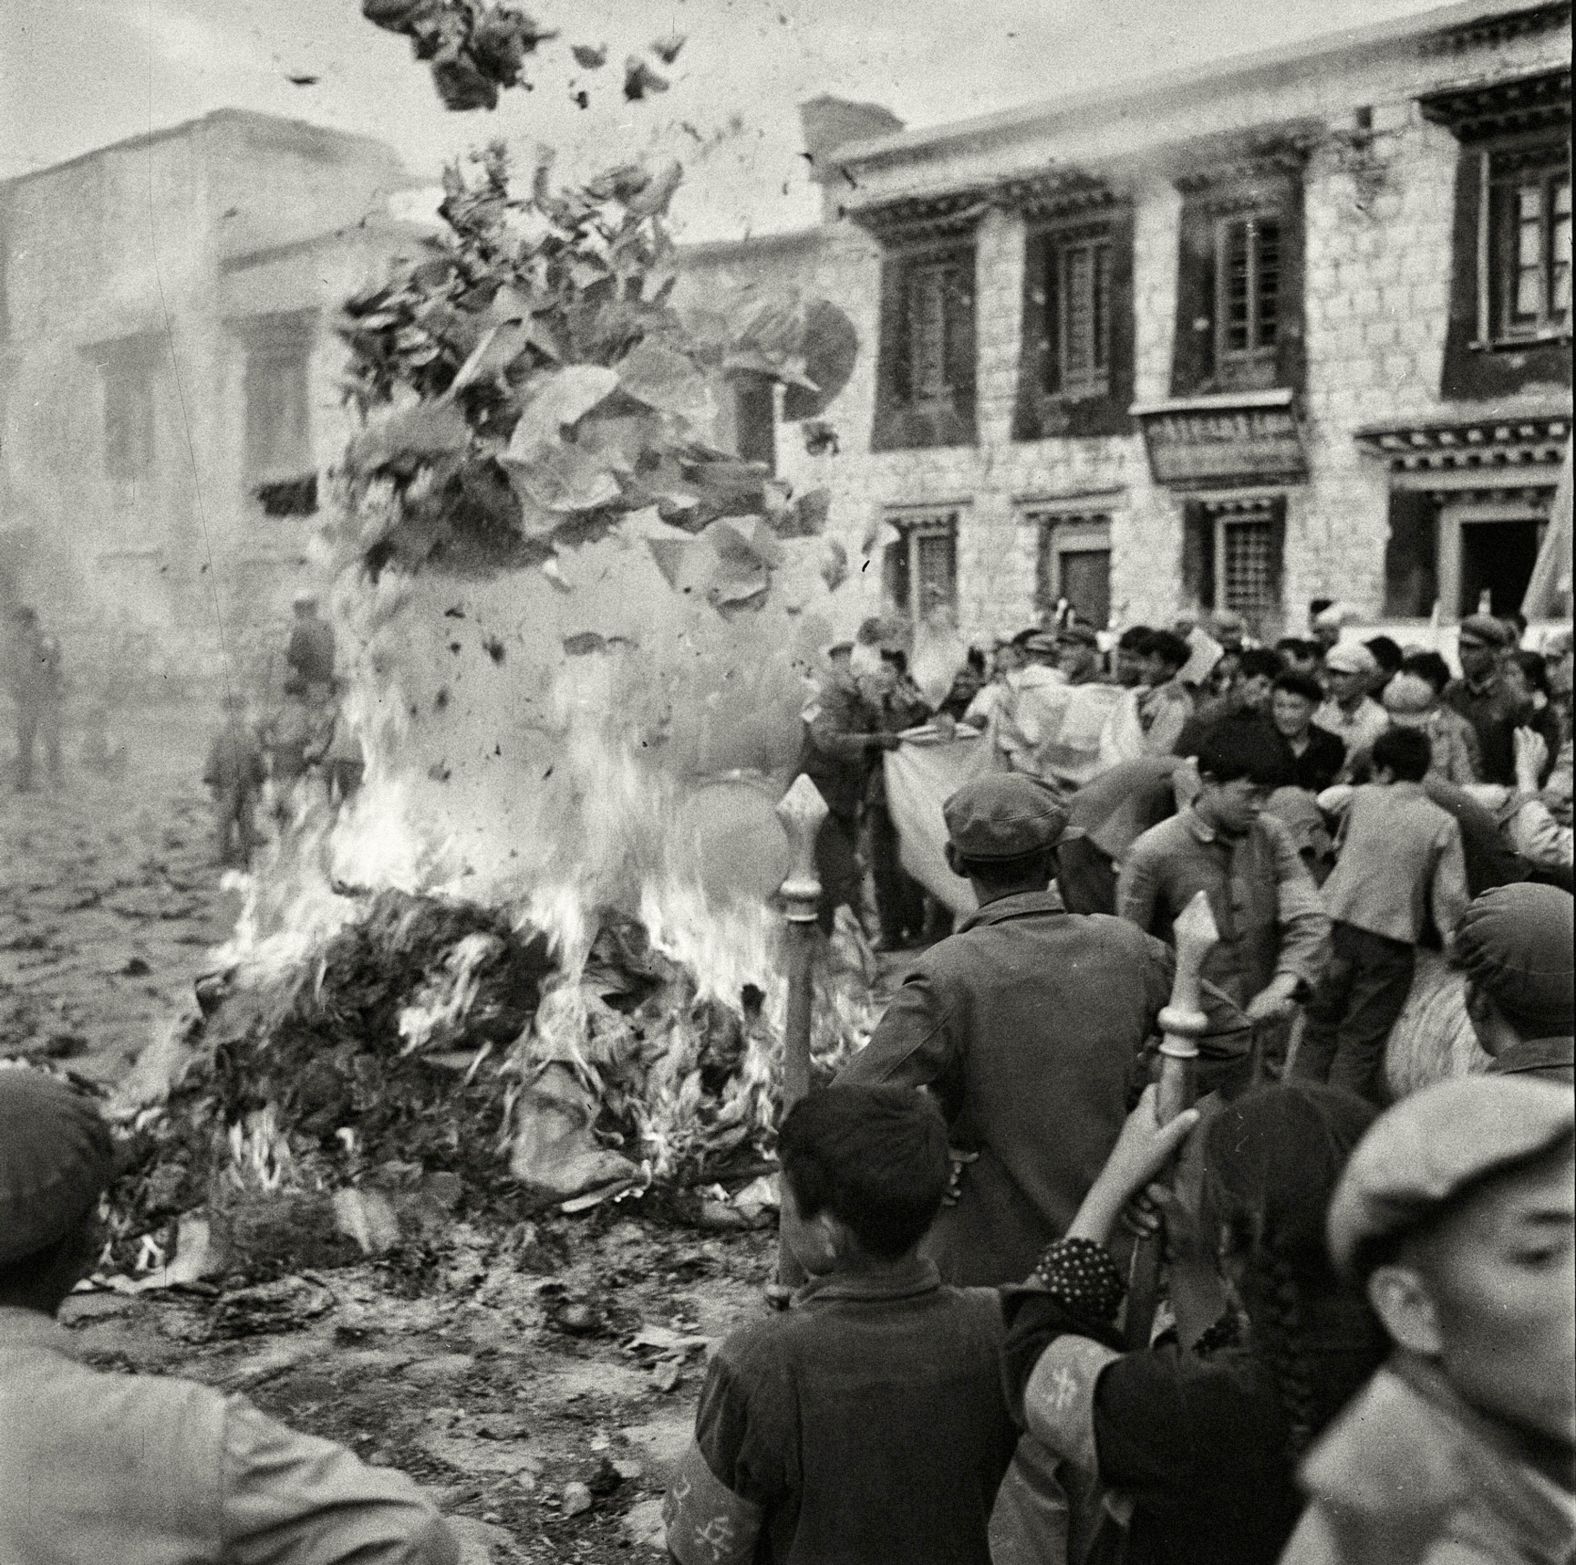 Chinese people burn books in 1966 during the country's Cultural Revolution, a state-led campaign to destroy literature, art and architecture deemed not revolutionary or modern enough. <a href="https://www.cnn.com/2019/09/29/asia/china-beijing-mao-october-1-70-intl-hnk/index.html" target="_blank">Mao tried cling to power</a> by building a fanatical personality cult around himself and his ideas, which threw the country into chaos. He set the People's Liberation Army and students — young Mao supporters known as the Red Guards — on witch hunts against his opponents. Over the next decade, millions of Chinese suffered or perished, particularly teachers, writers, artists, party leaders — anyone determined to be "reactionary" in some way.